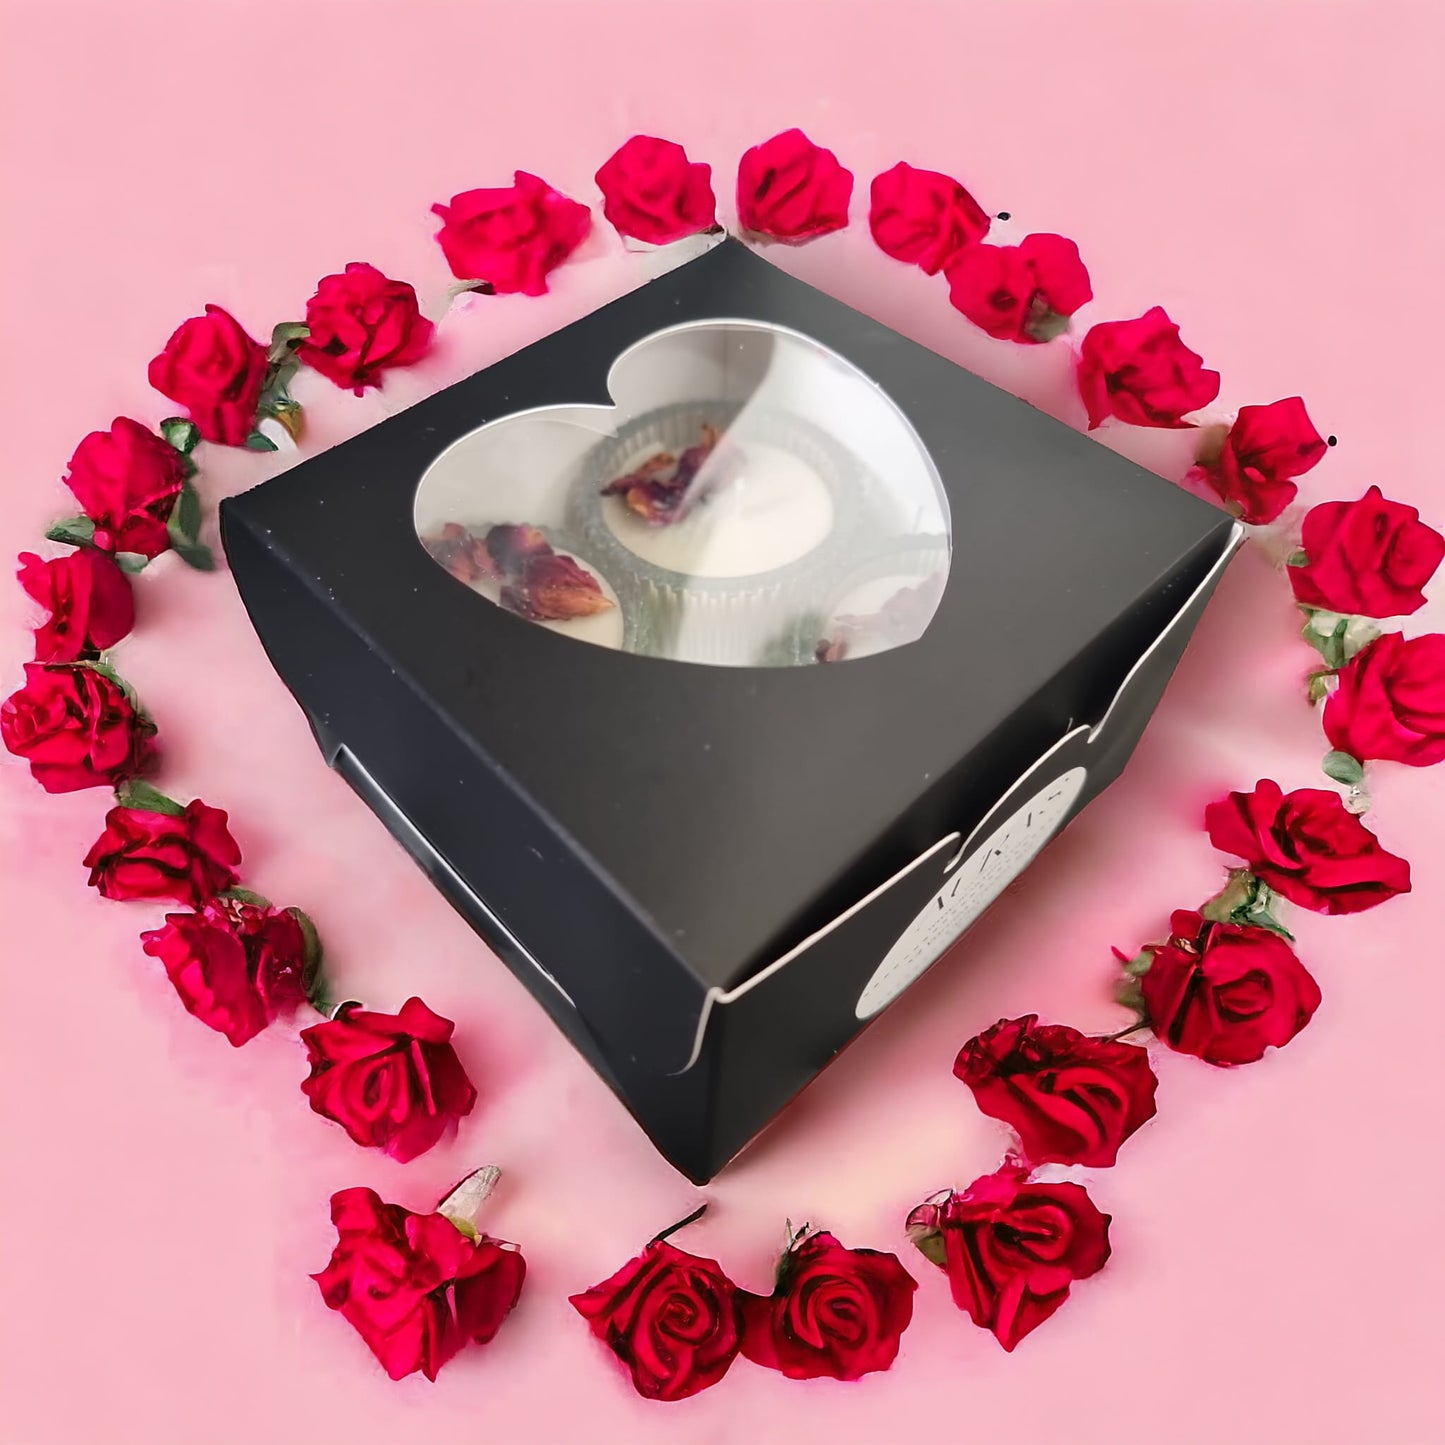 Valentine's Gift Set - Heart-Shaped Tealights in Vanilla Cream Scent with Rose Petals, Presented in a Black Box - Auras Workshop  -   -   - Cyprus & Greece - Wholesale - Retail #